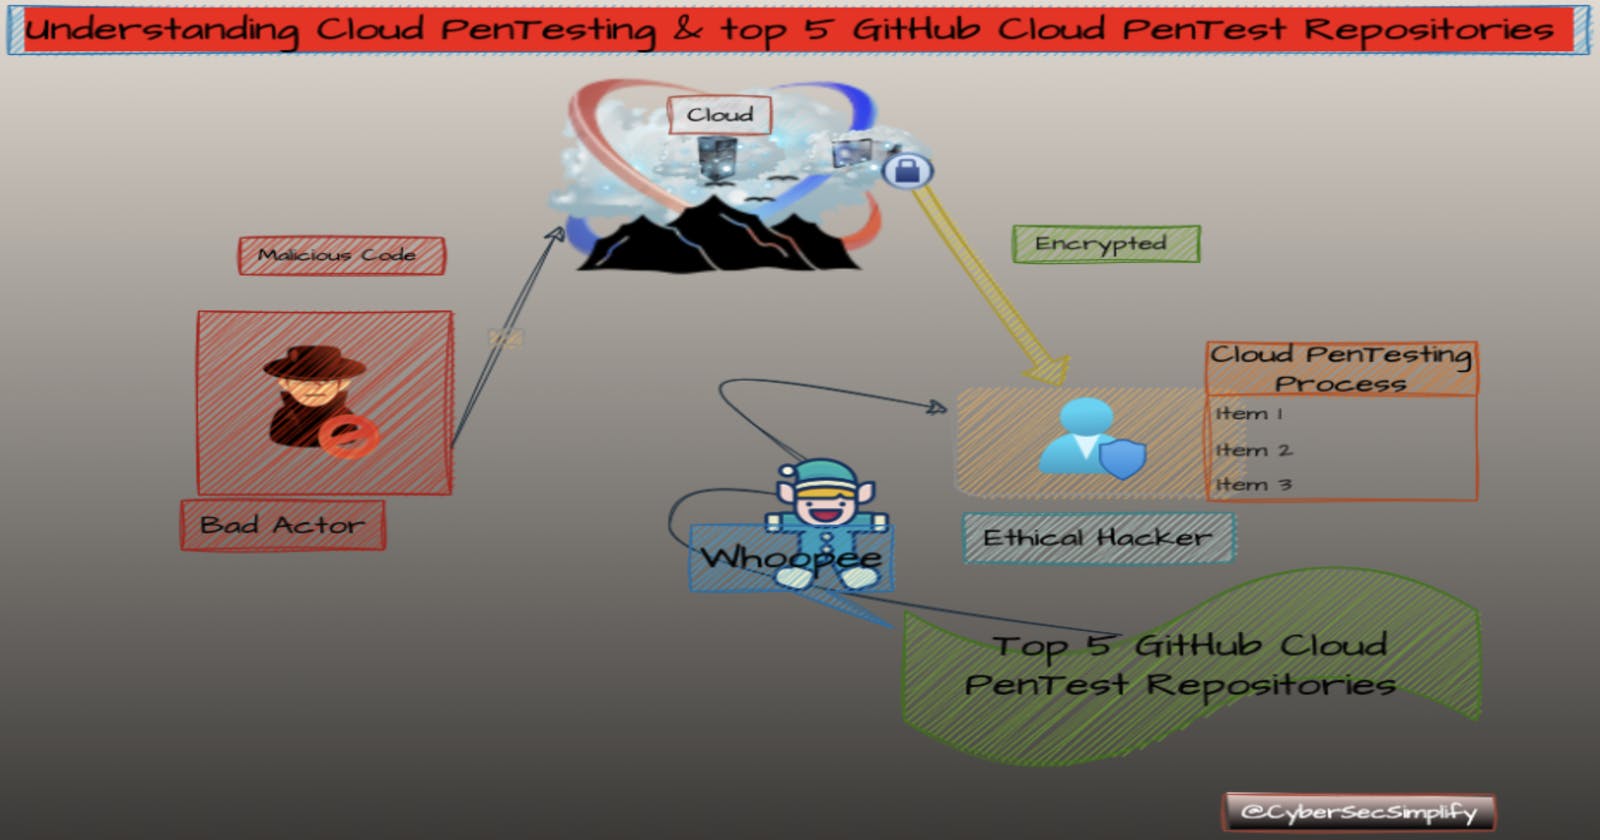 Understanding Cloud PenTesting: Why it's Important & The Top 5 -GitHub Repositories to Get You Started